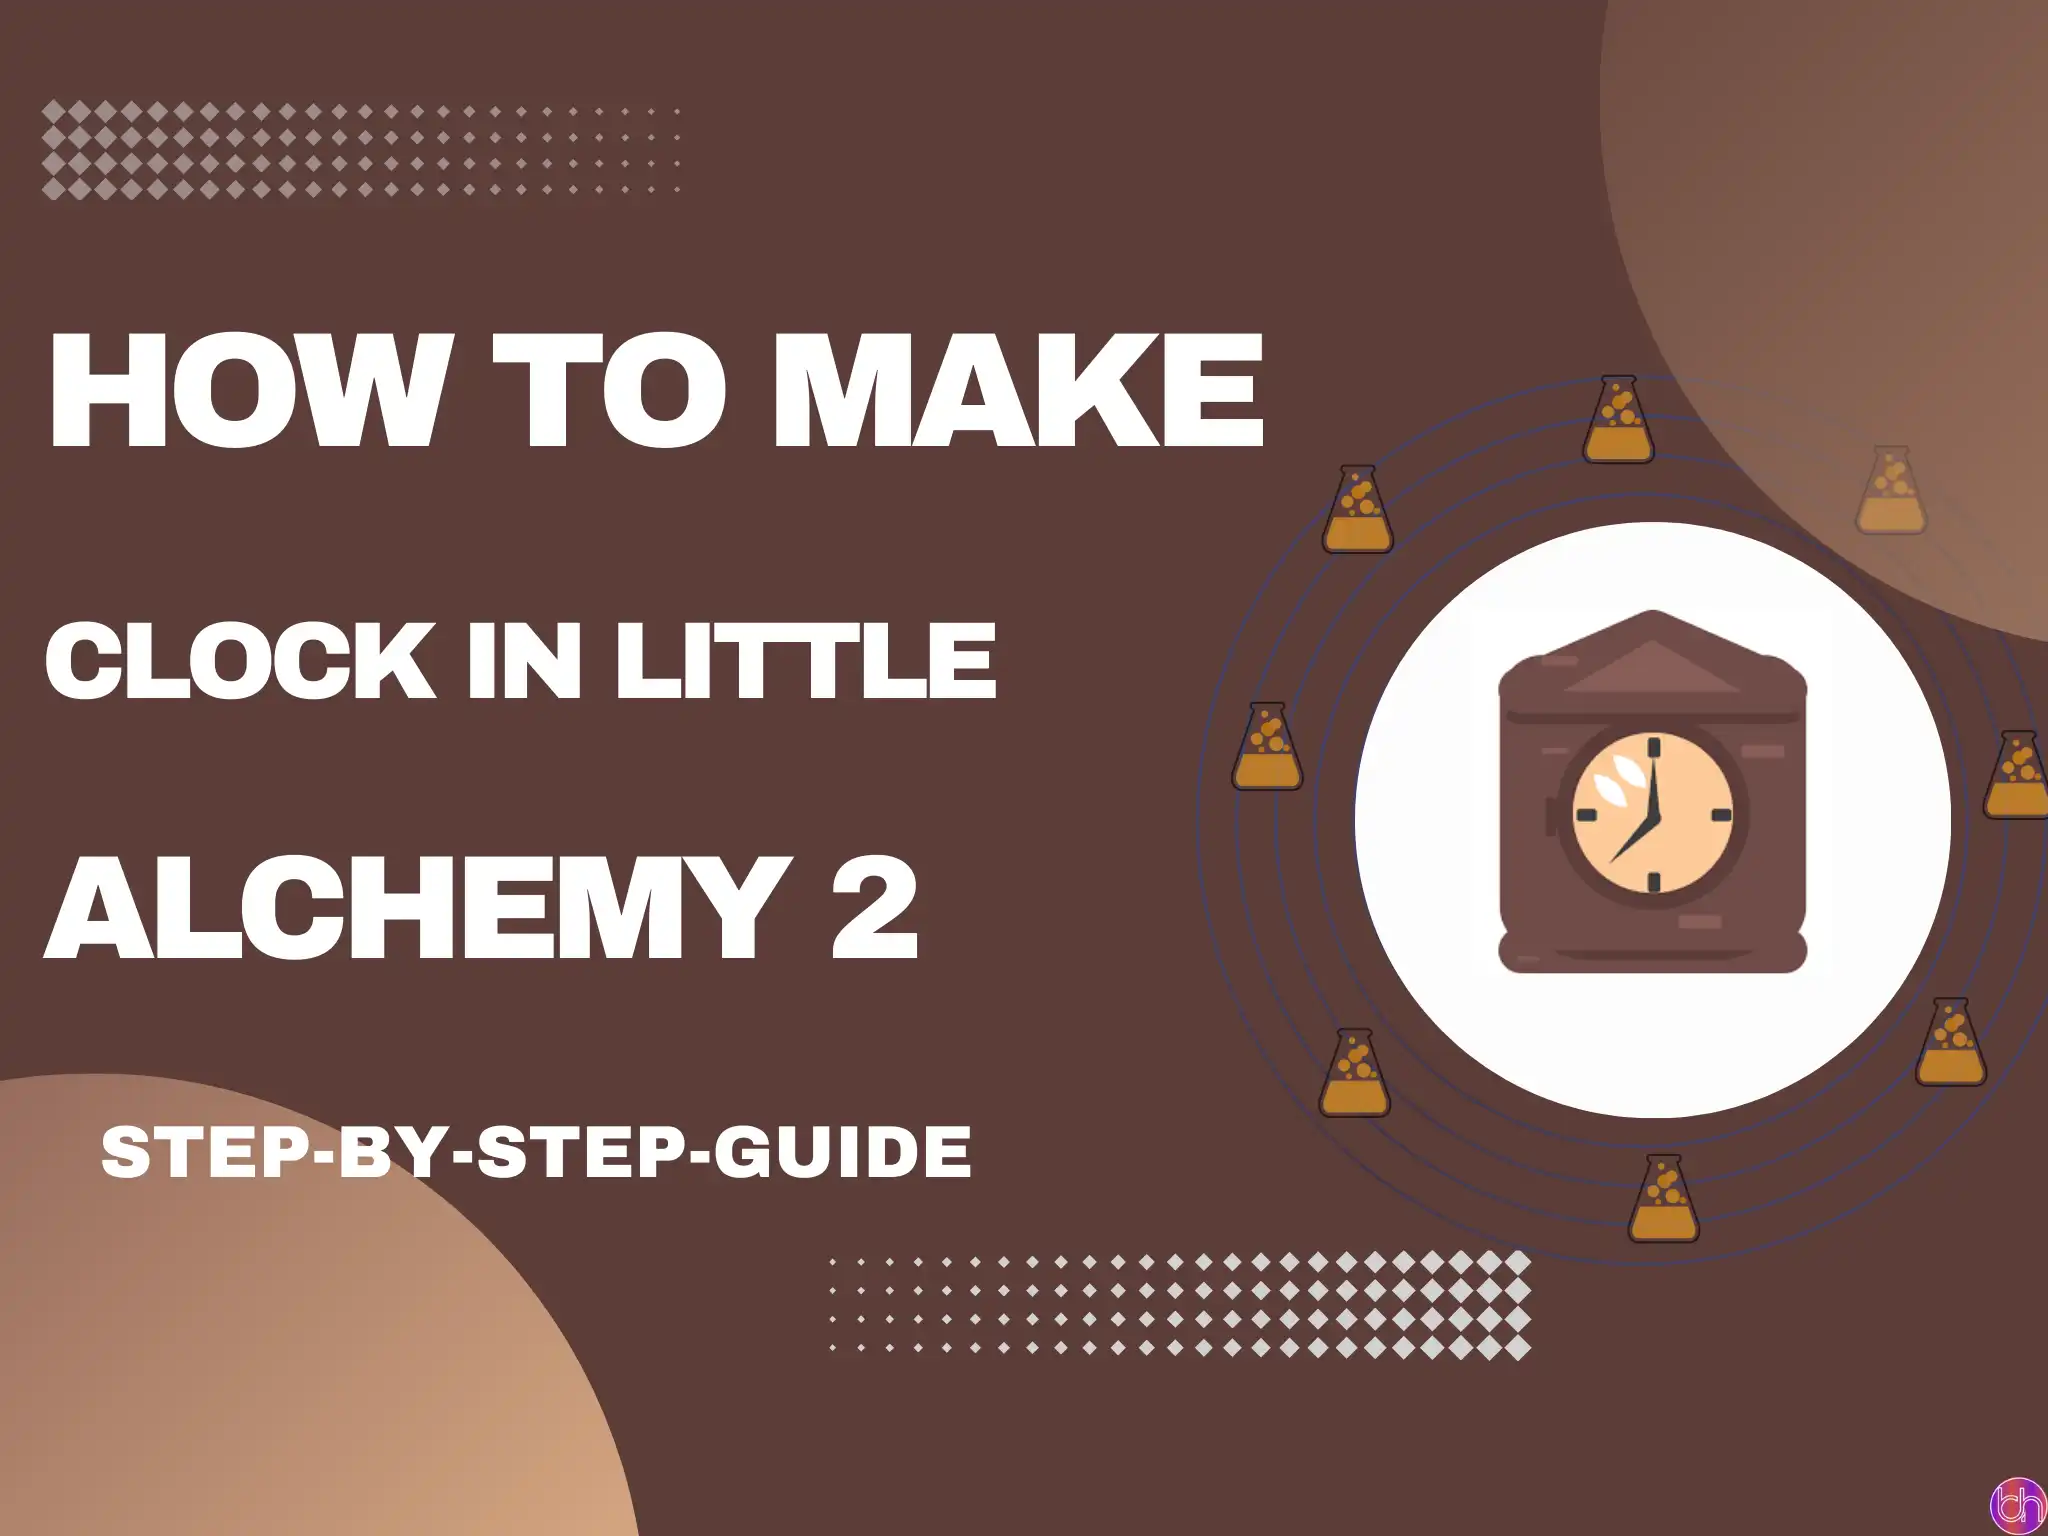 How to make Clock in little alchemy 2